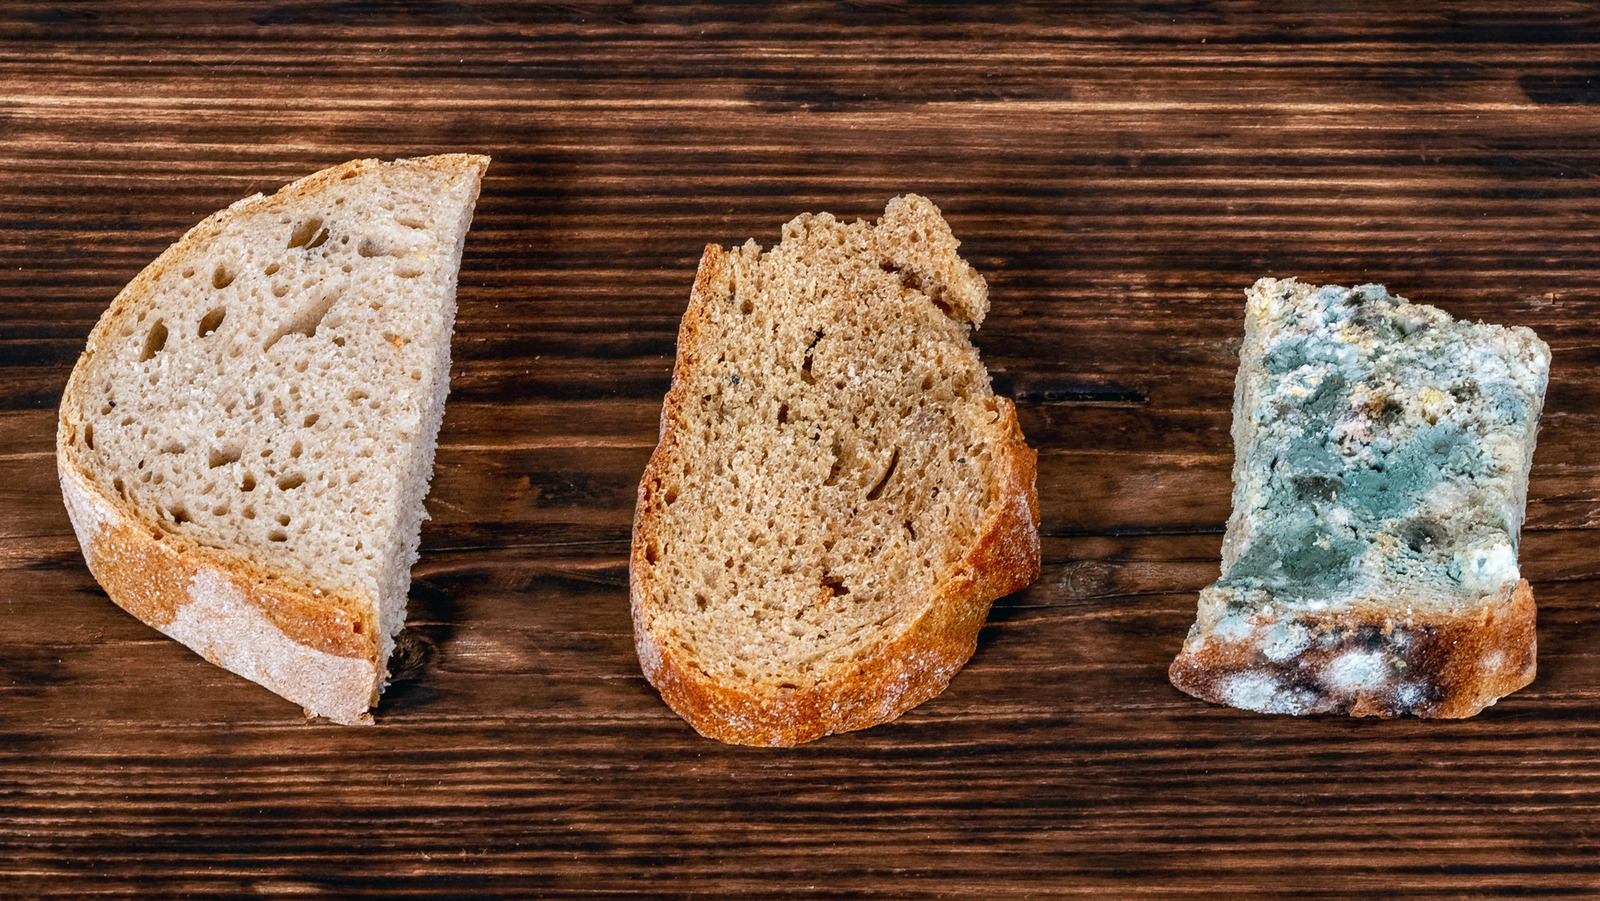 https://www.thedailymeal.com/img/gallery/ditch-your-bread-expiration-date-how-to-know-if-your-loaf-has-actually-gone-bad/l-intro-1673971311.jpg